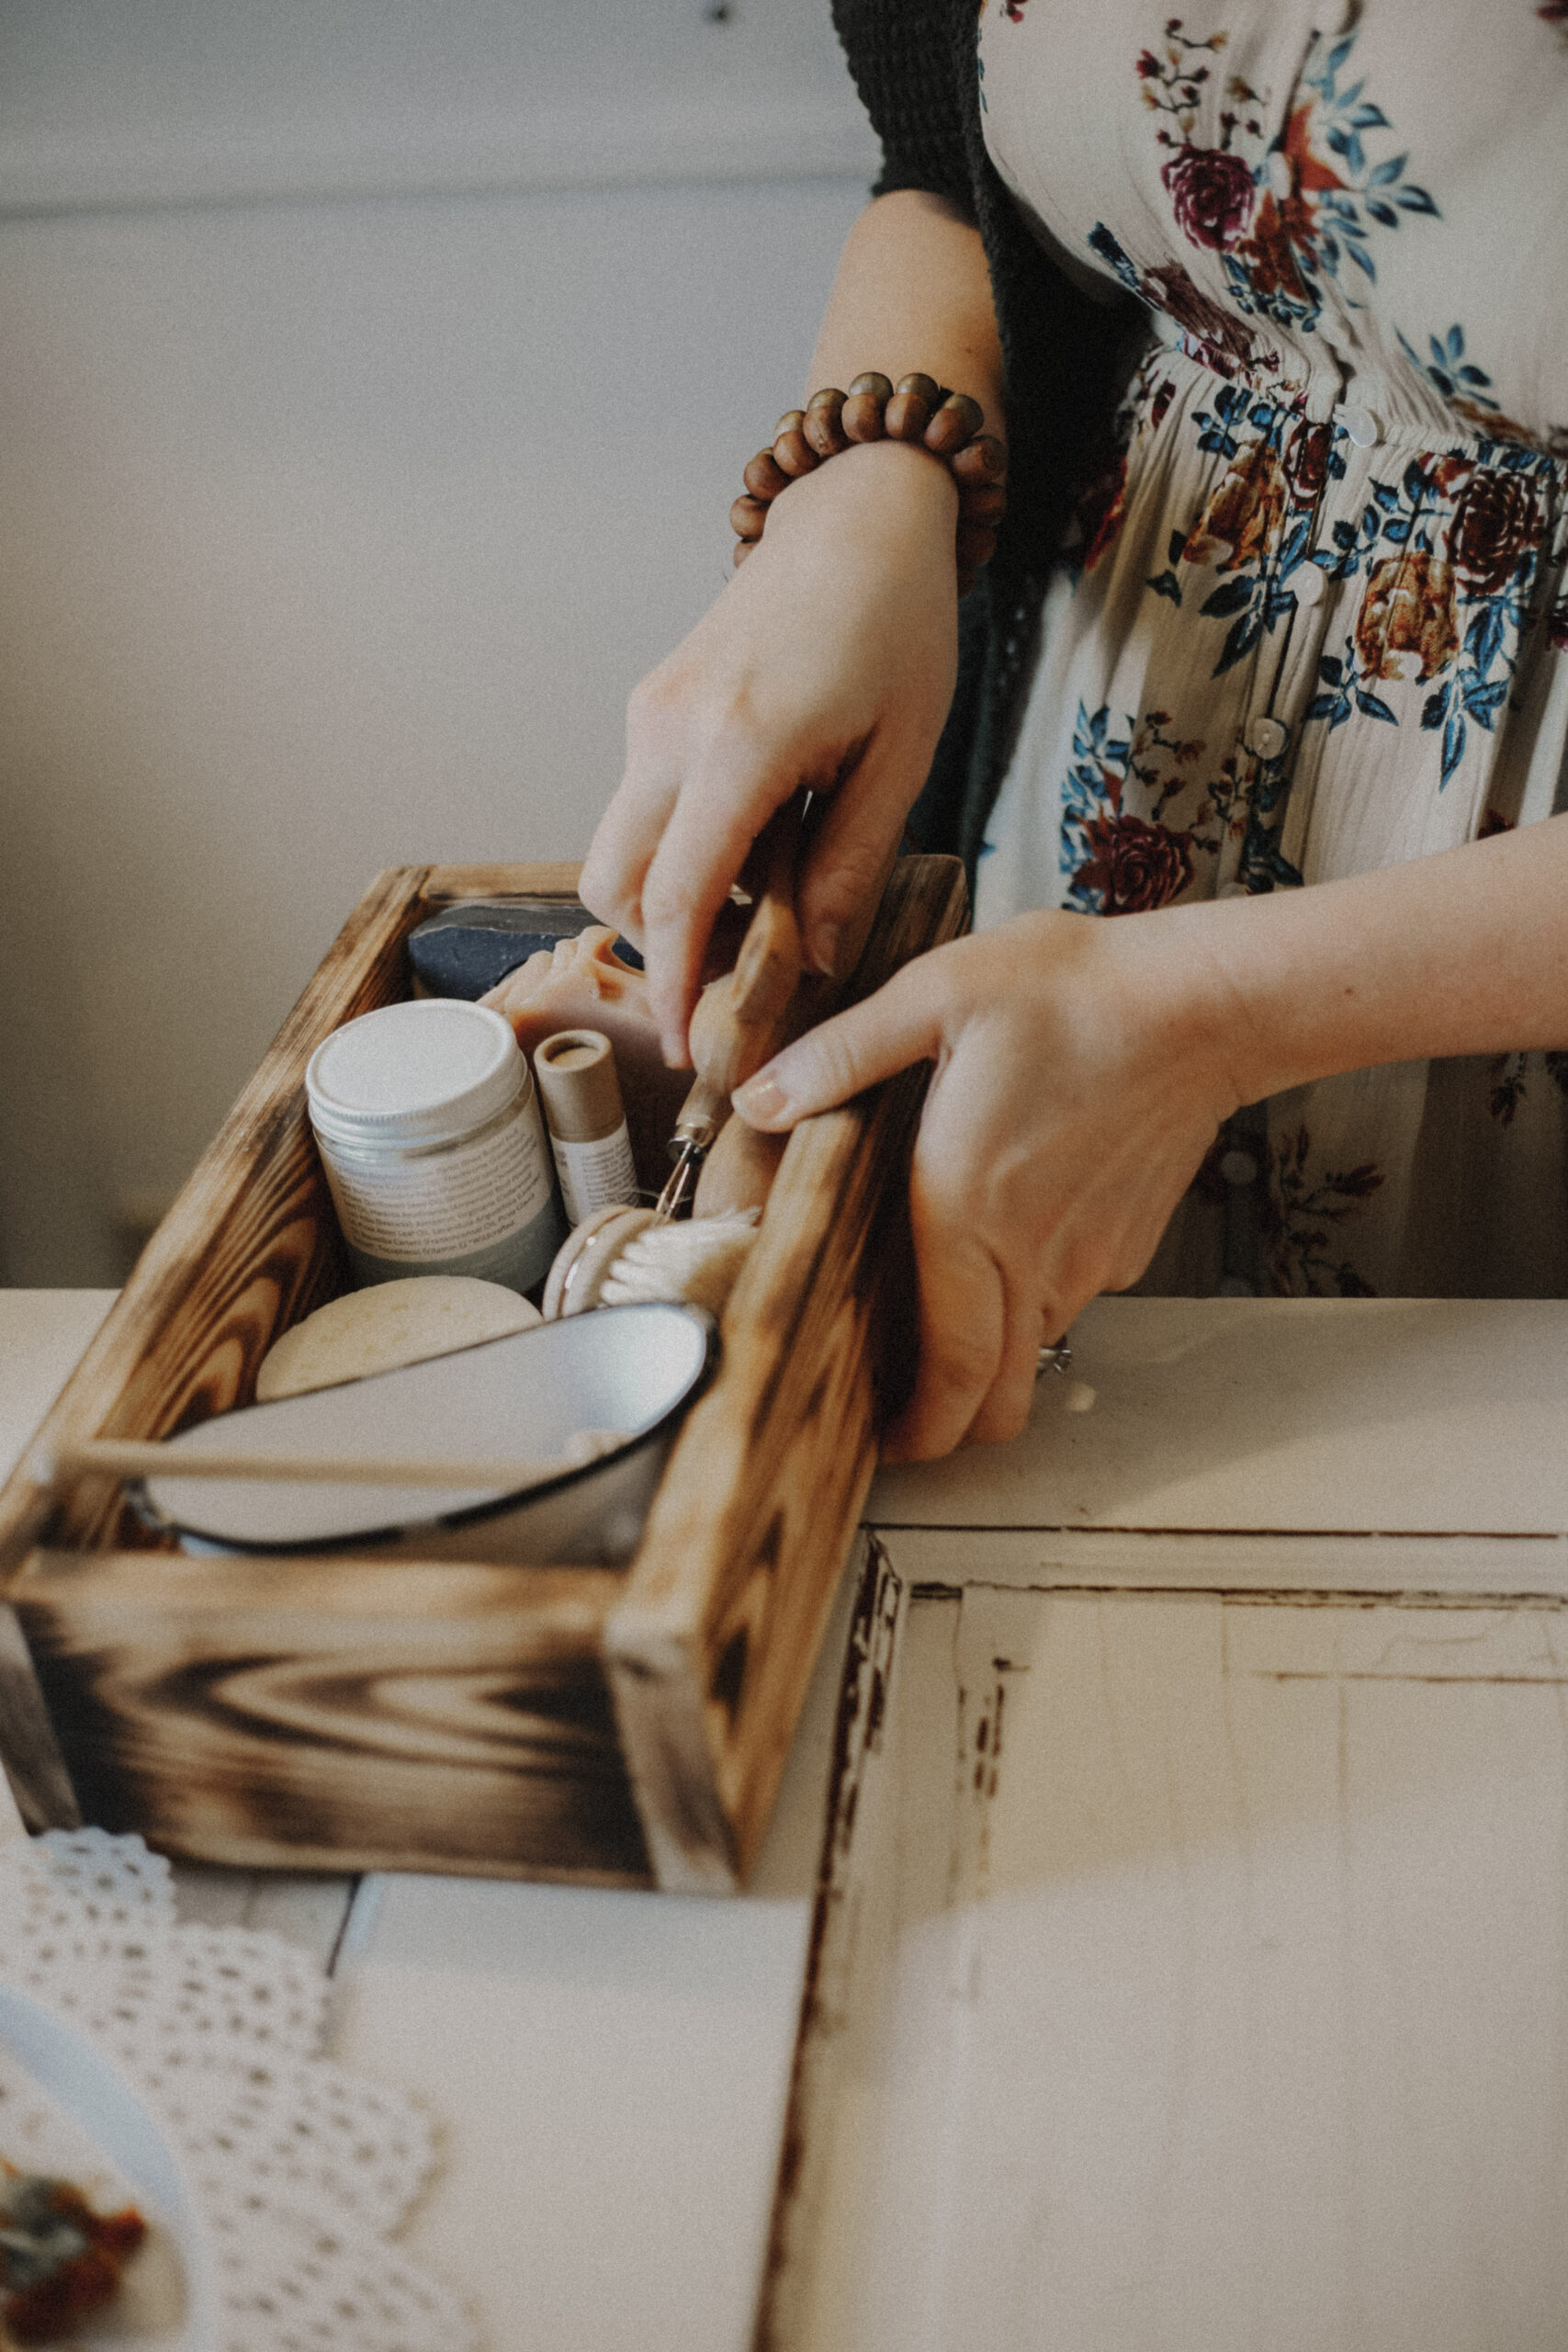 A person's hands organizing skincare products in a wooden caddy on a white table.